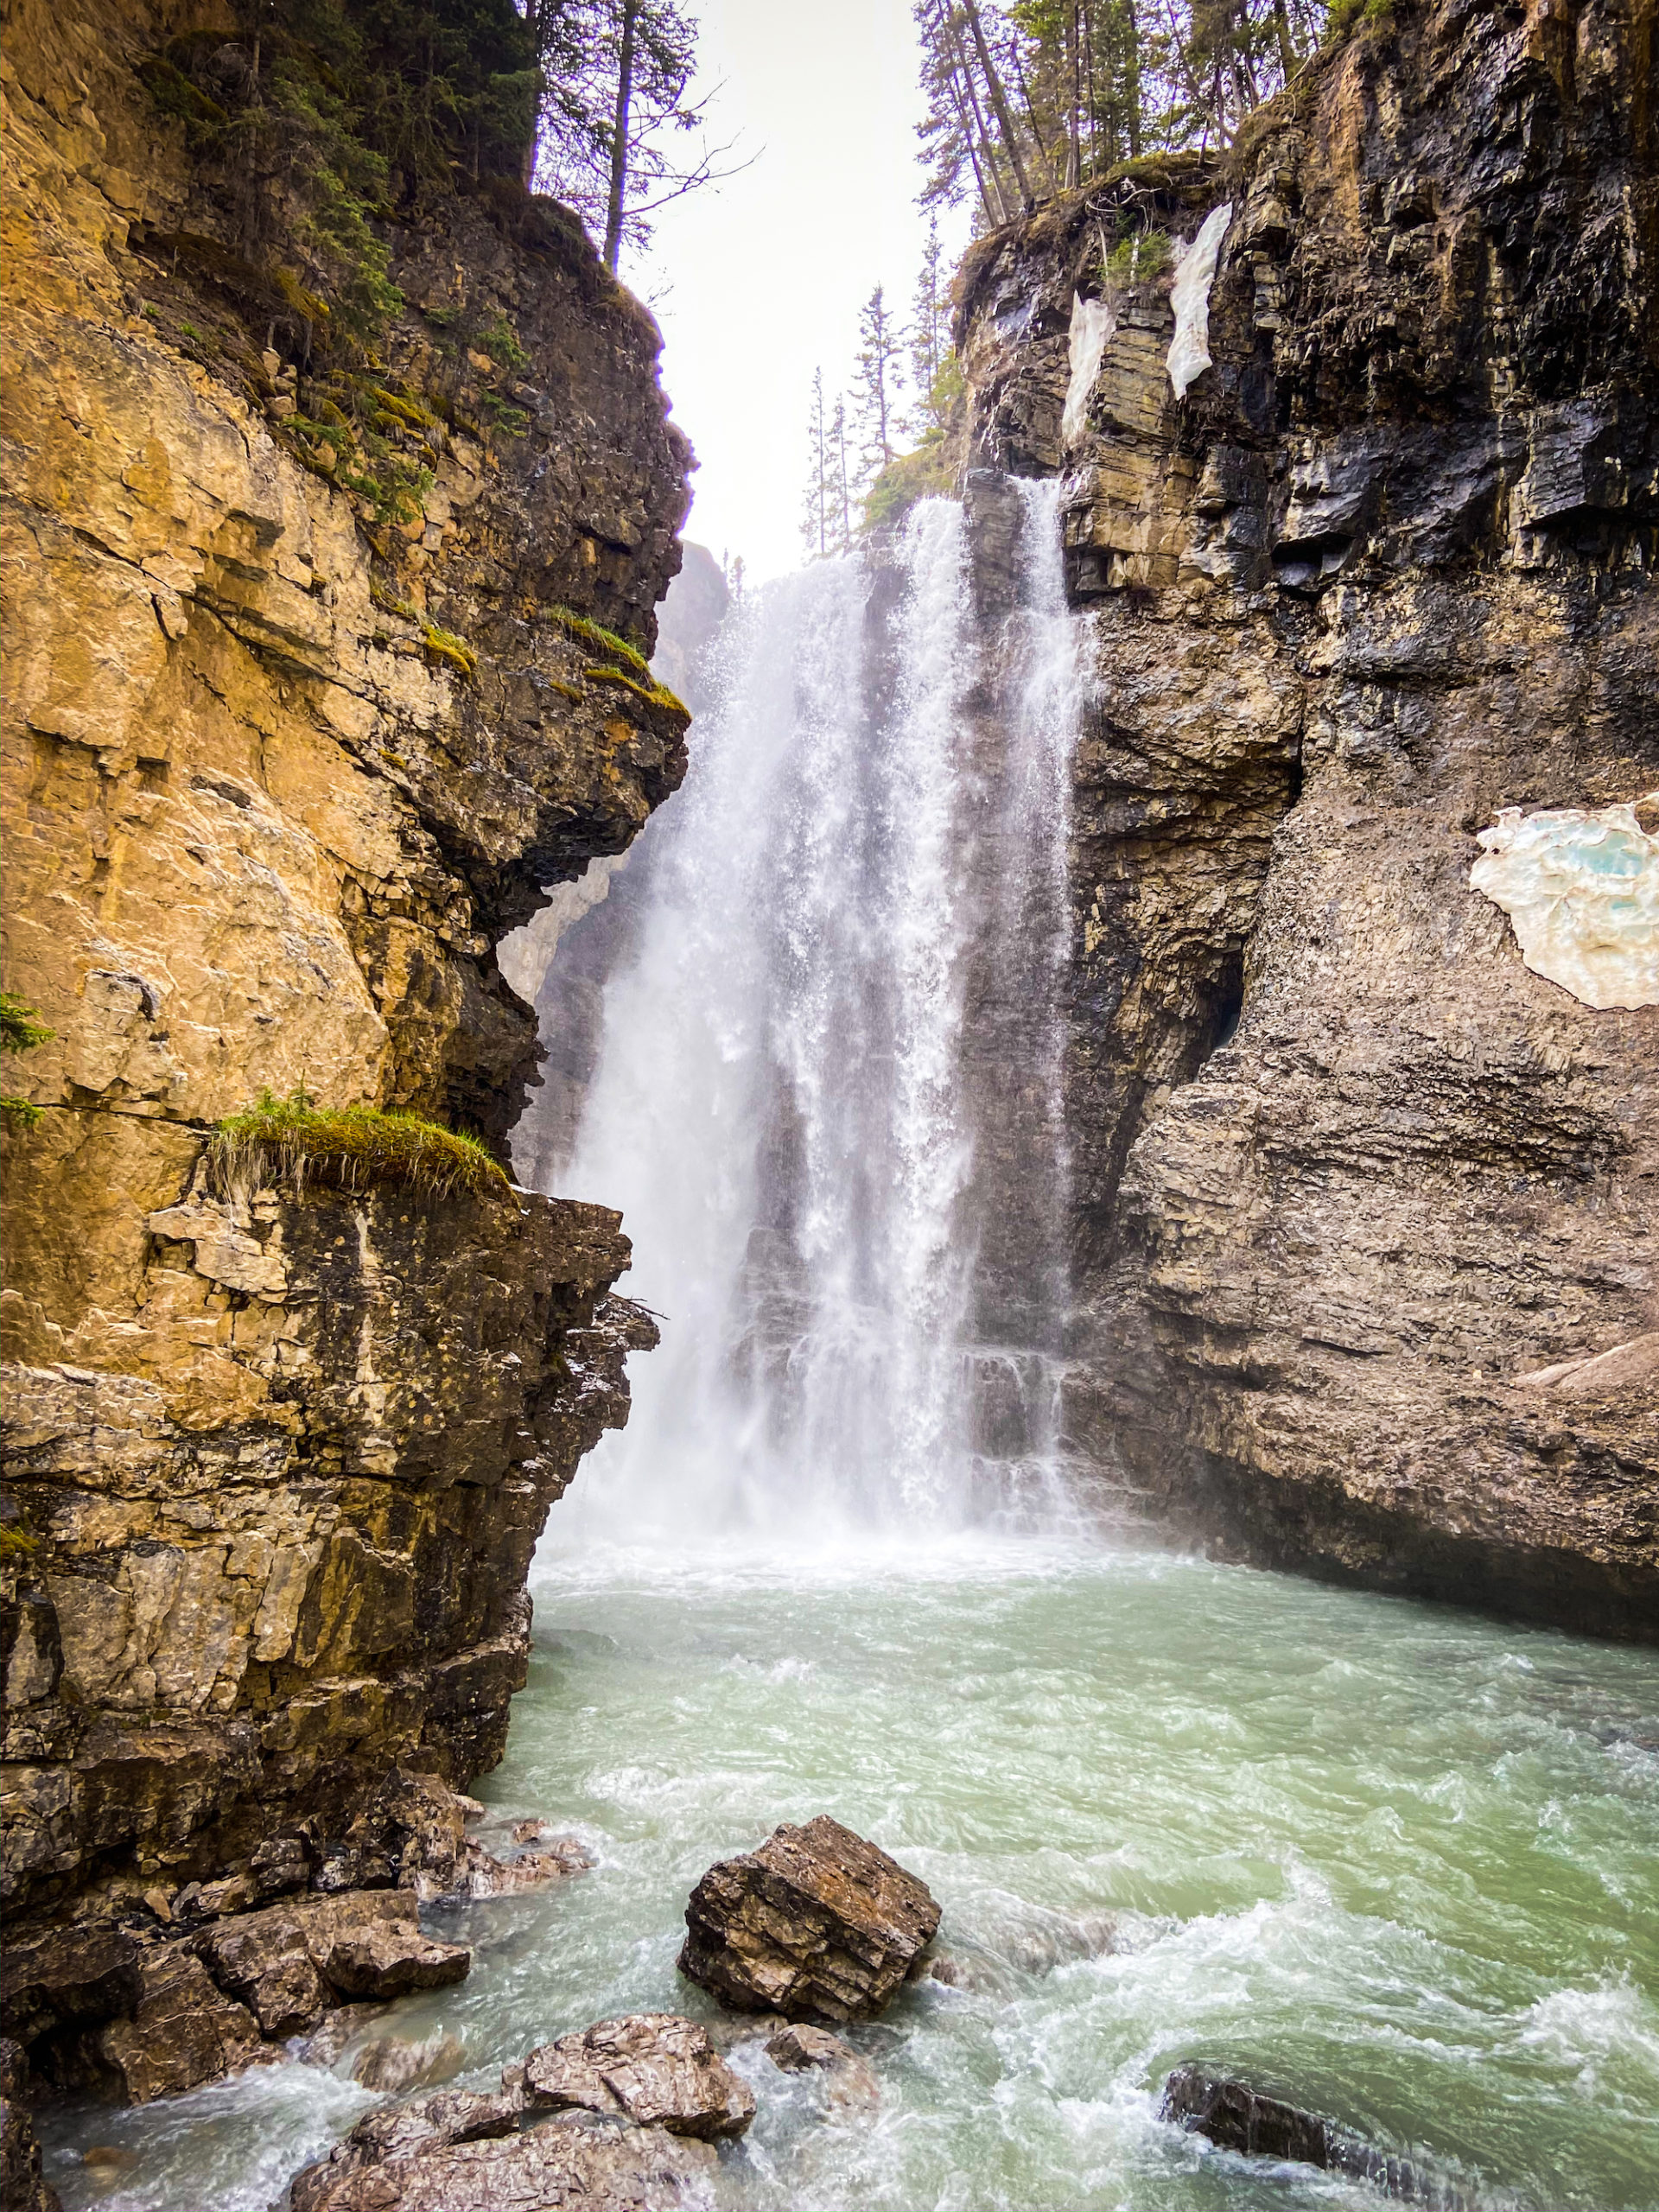 Locals Guide To The Johnston Canyon Hike In Banff National Park The